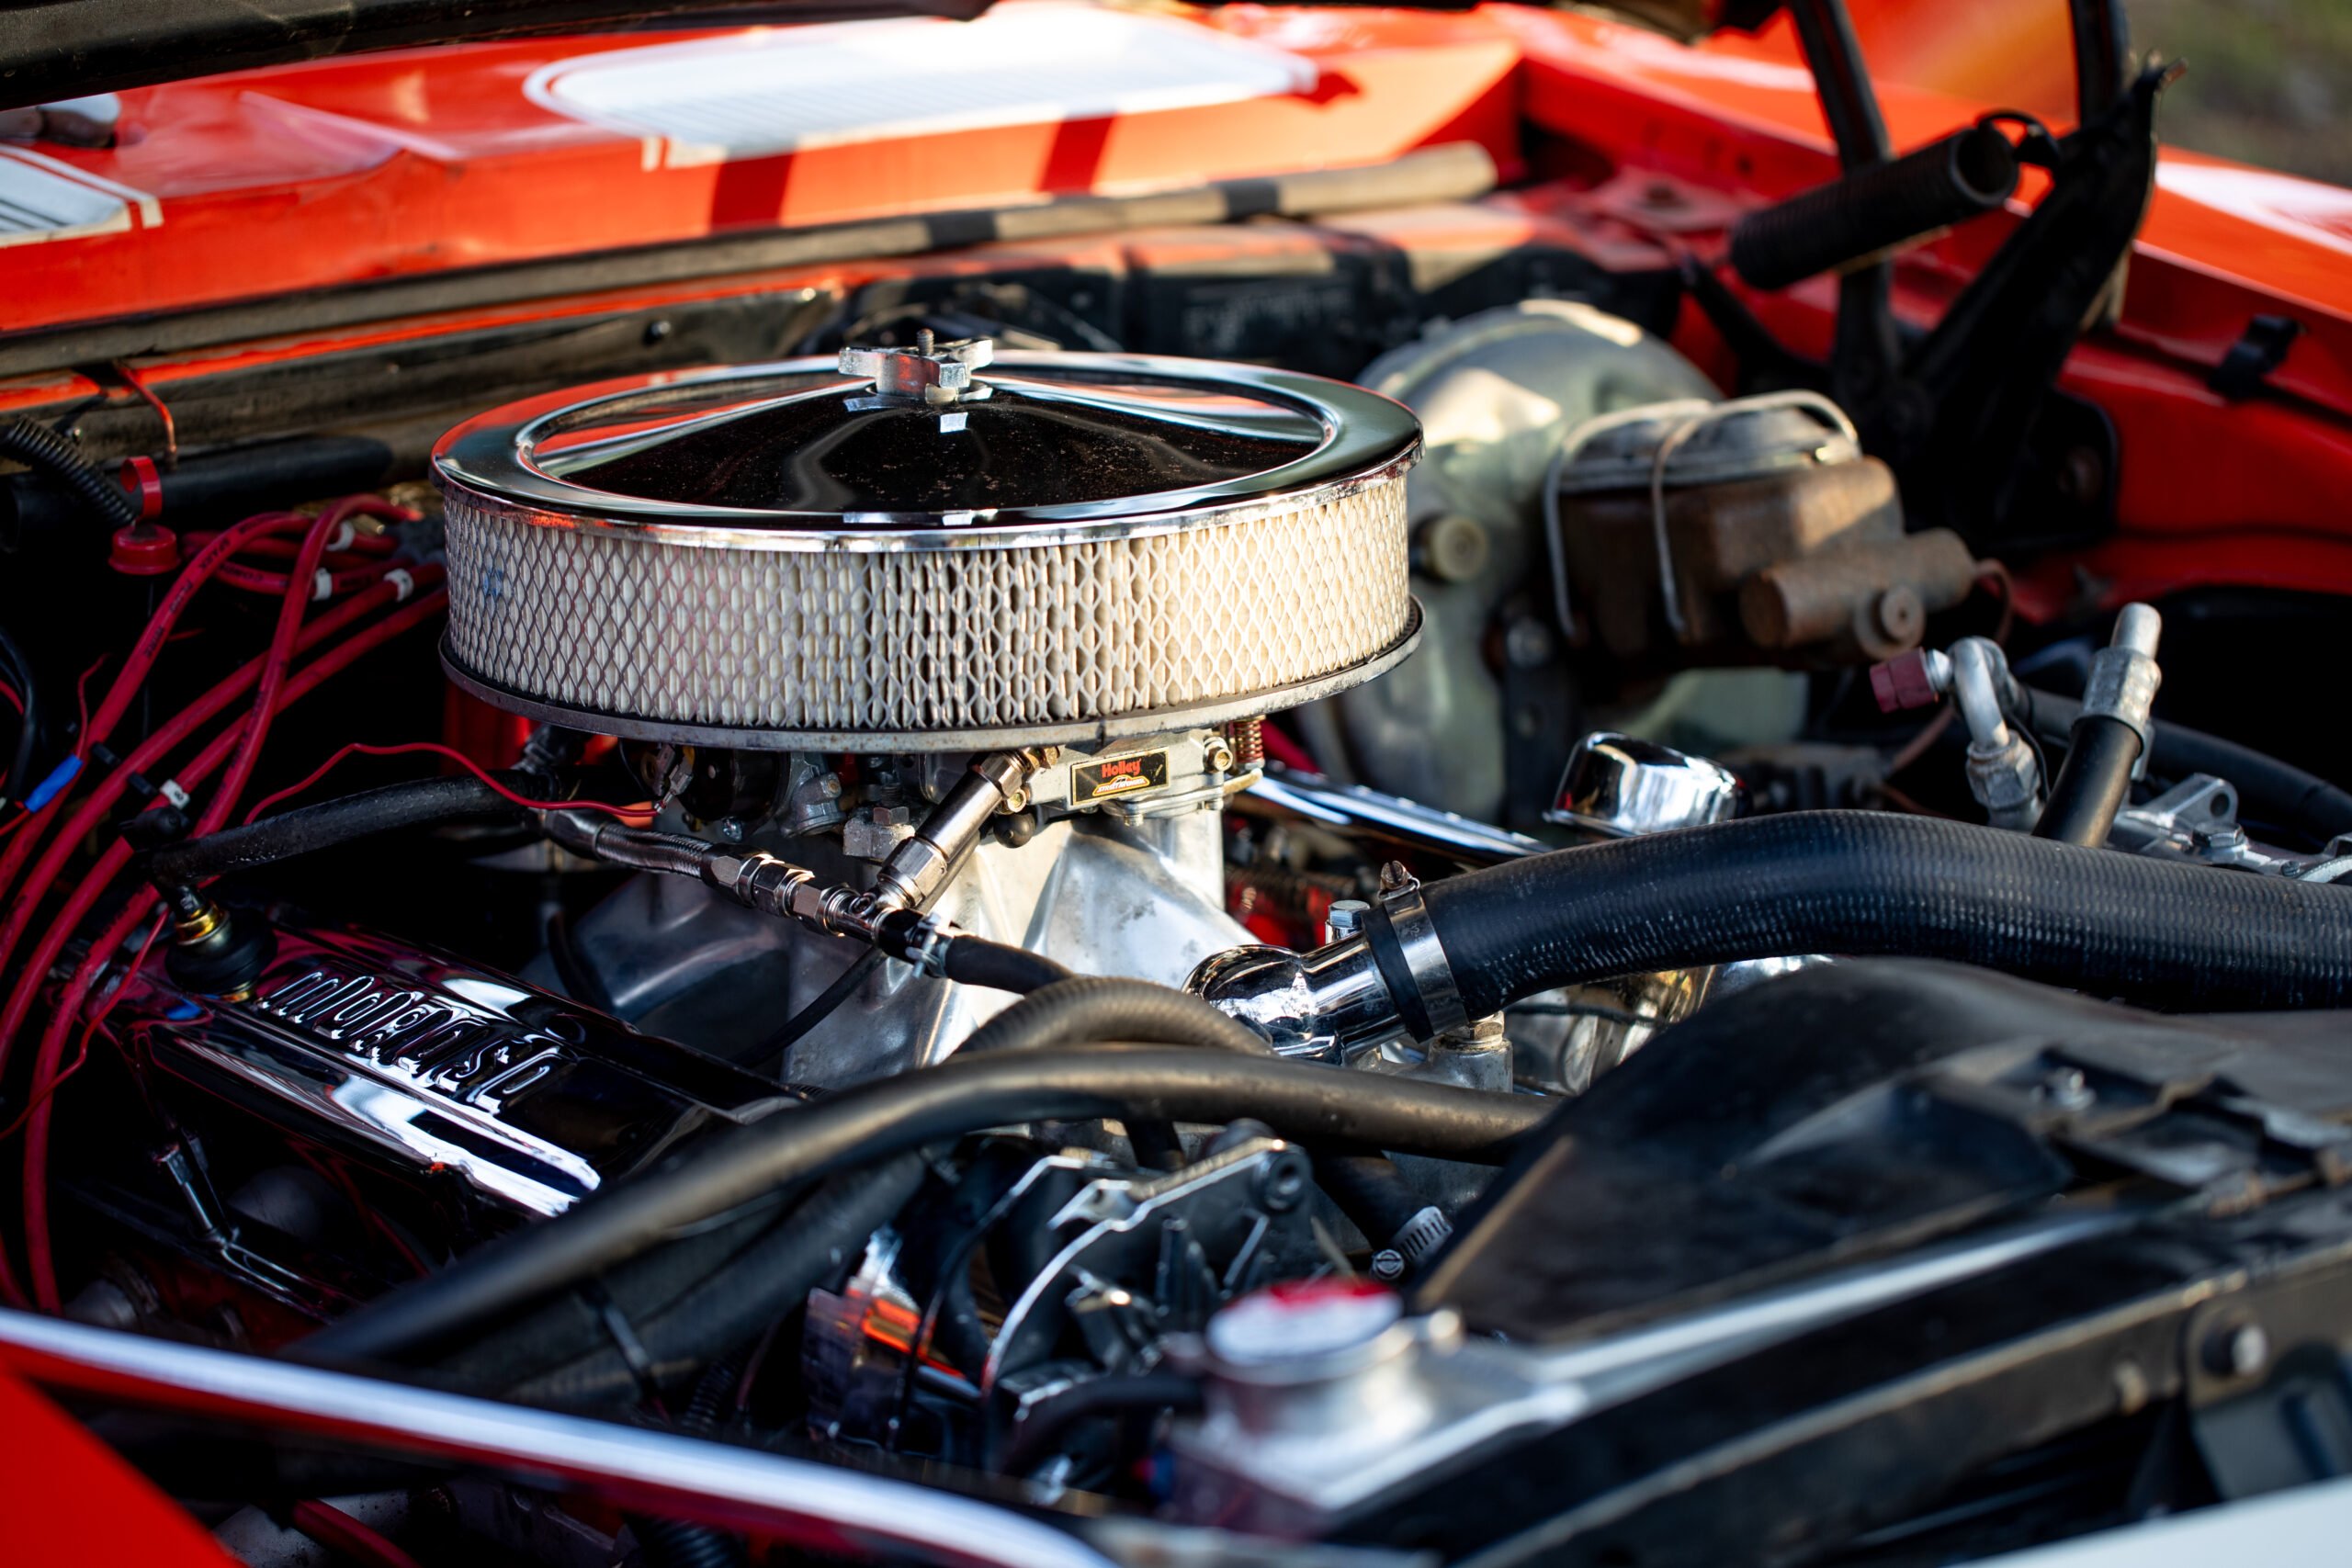 Close-up of a car engine with an air filter, visible parts, and wiring under the hood of a red vehicle.